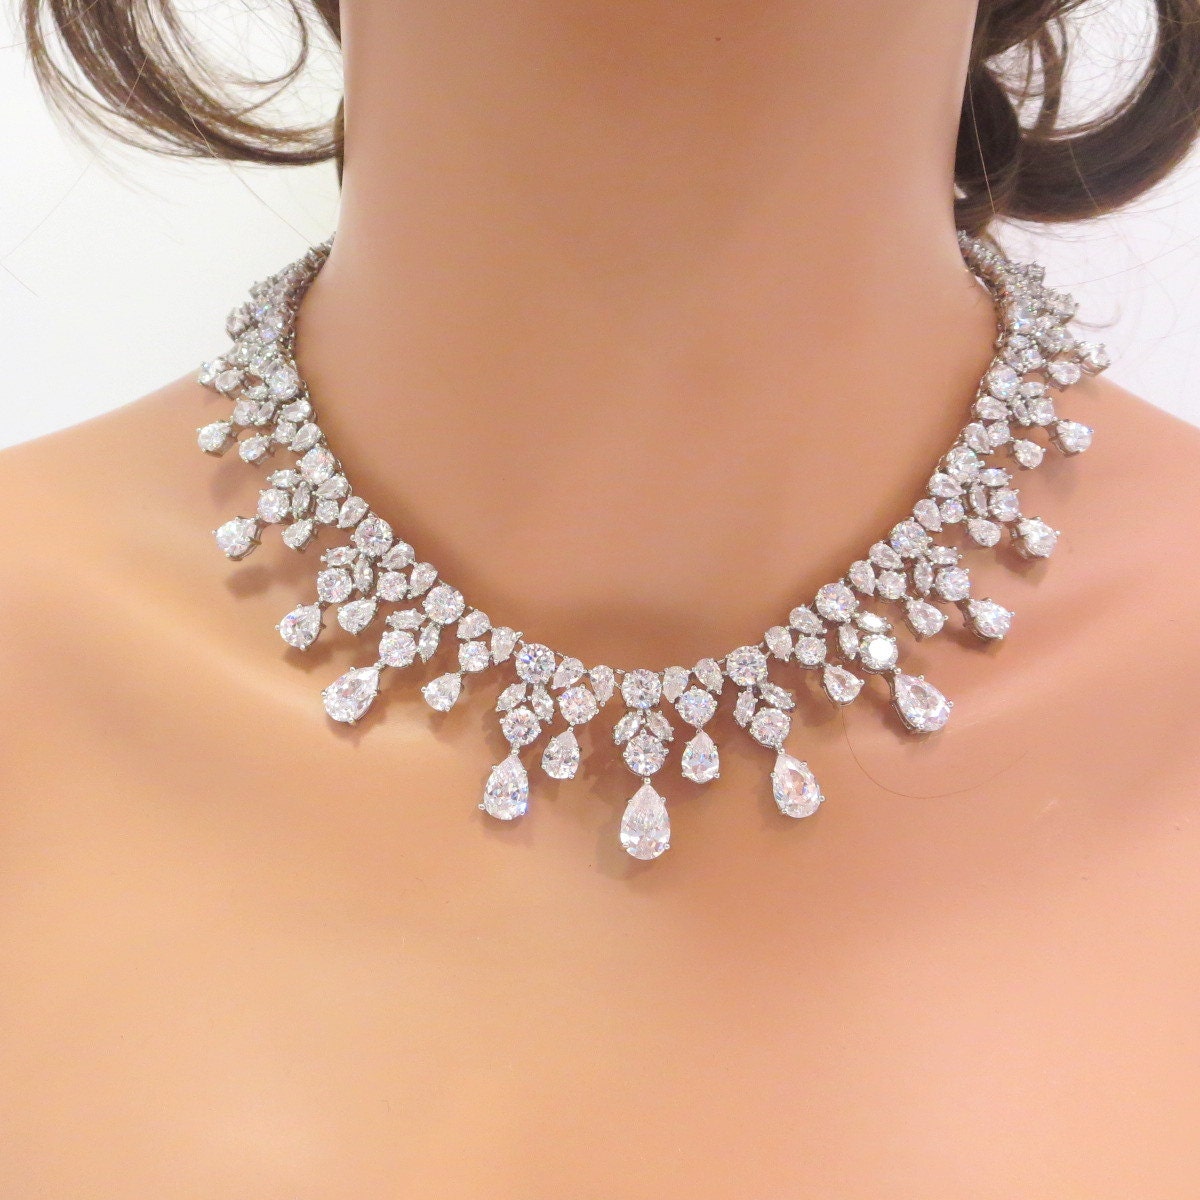 Bridal statement necklace and earrings Wedding necklace set